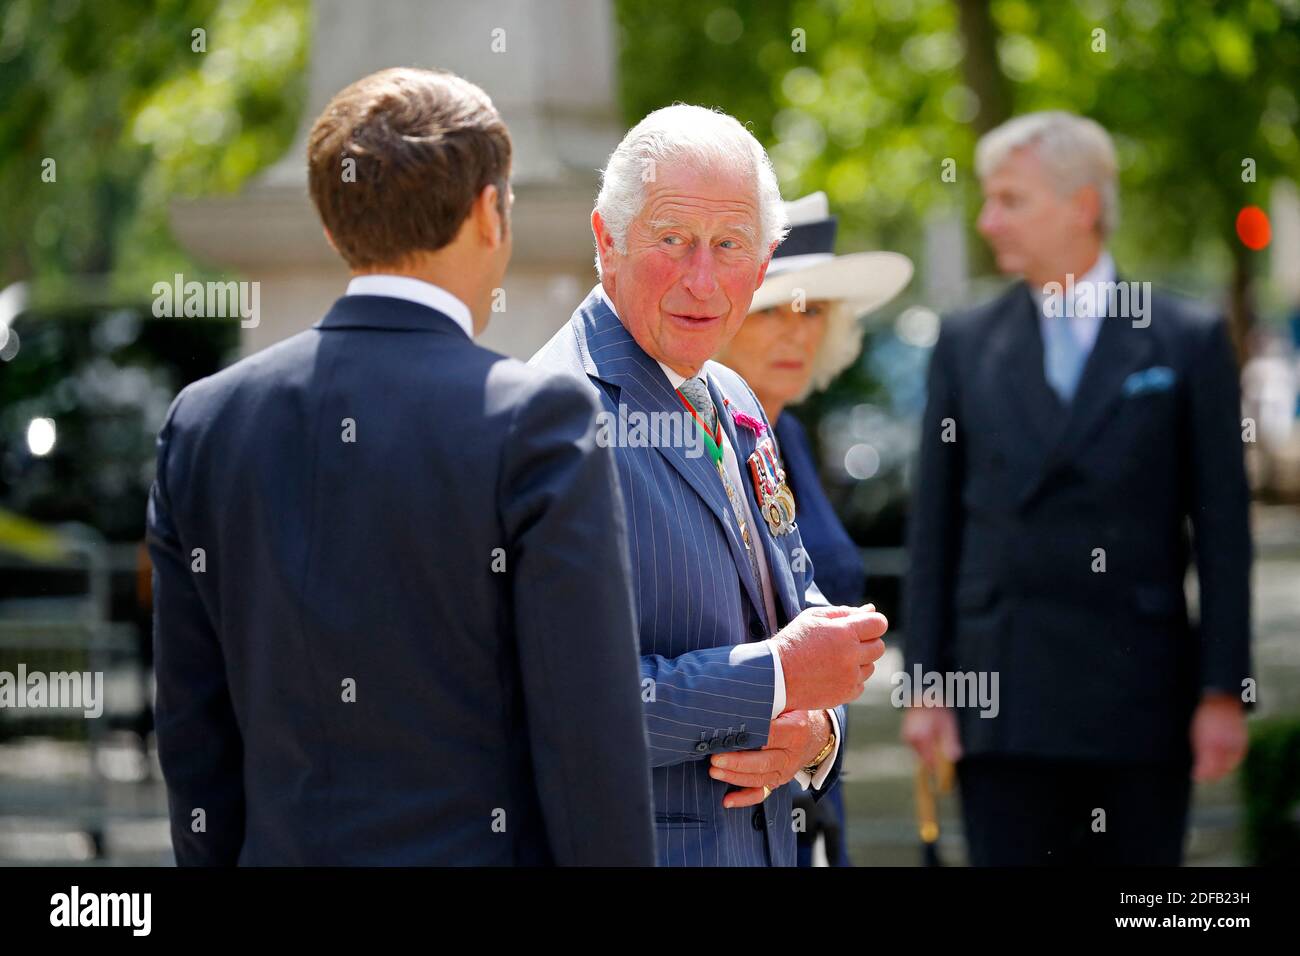 Britain's Prince Charles, Prince of Wales (C) and French President Emmanuel Macron (L) arrive to lay wreaths at the statue of former French president Charles de Gaulle at Carlton Gardens in central London on June 18, 2020 during a visit to mark the anniversary of former de Gaulle's appeal to French people to resist the Nazi occupation. - Macron visited London on June 18 to commemorate the 80th anniversary of former French president Charles de Gaulle's appeal to French people to resist the Nazi occupation during World War II. Photo by Tolga AKMEN/Pool/ABACAPRESS.COM Stock Photo